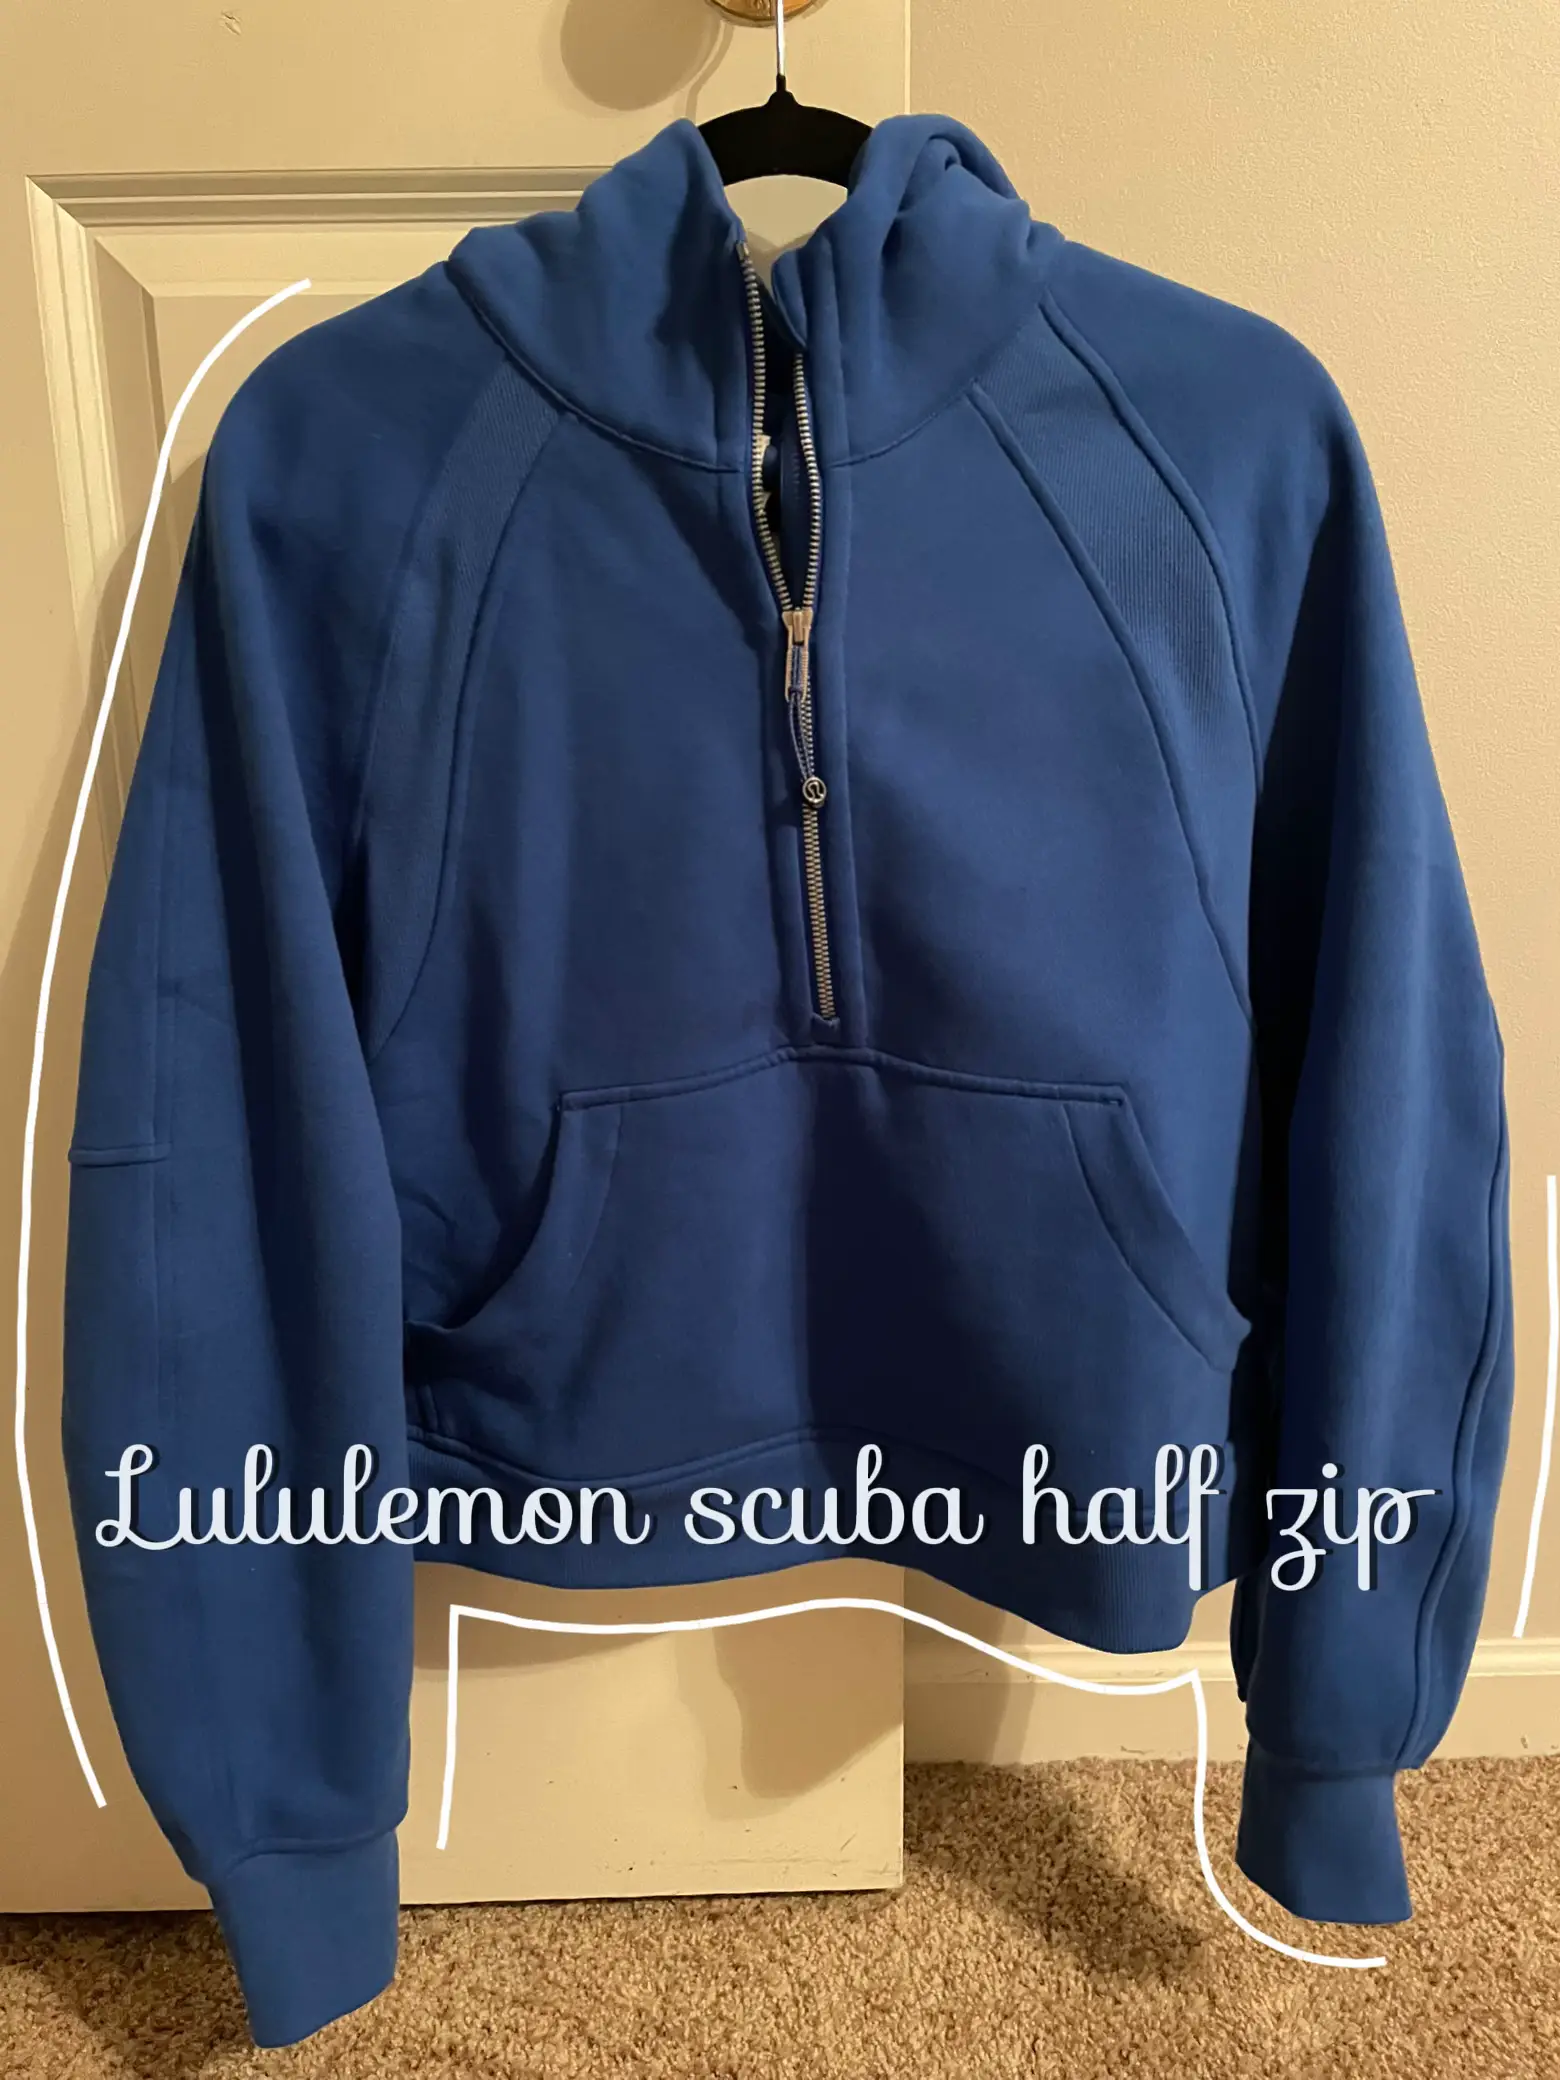 Lululemon scuba half zip, Gallery posted by Gianna Medrano